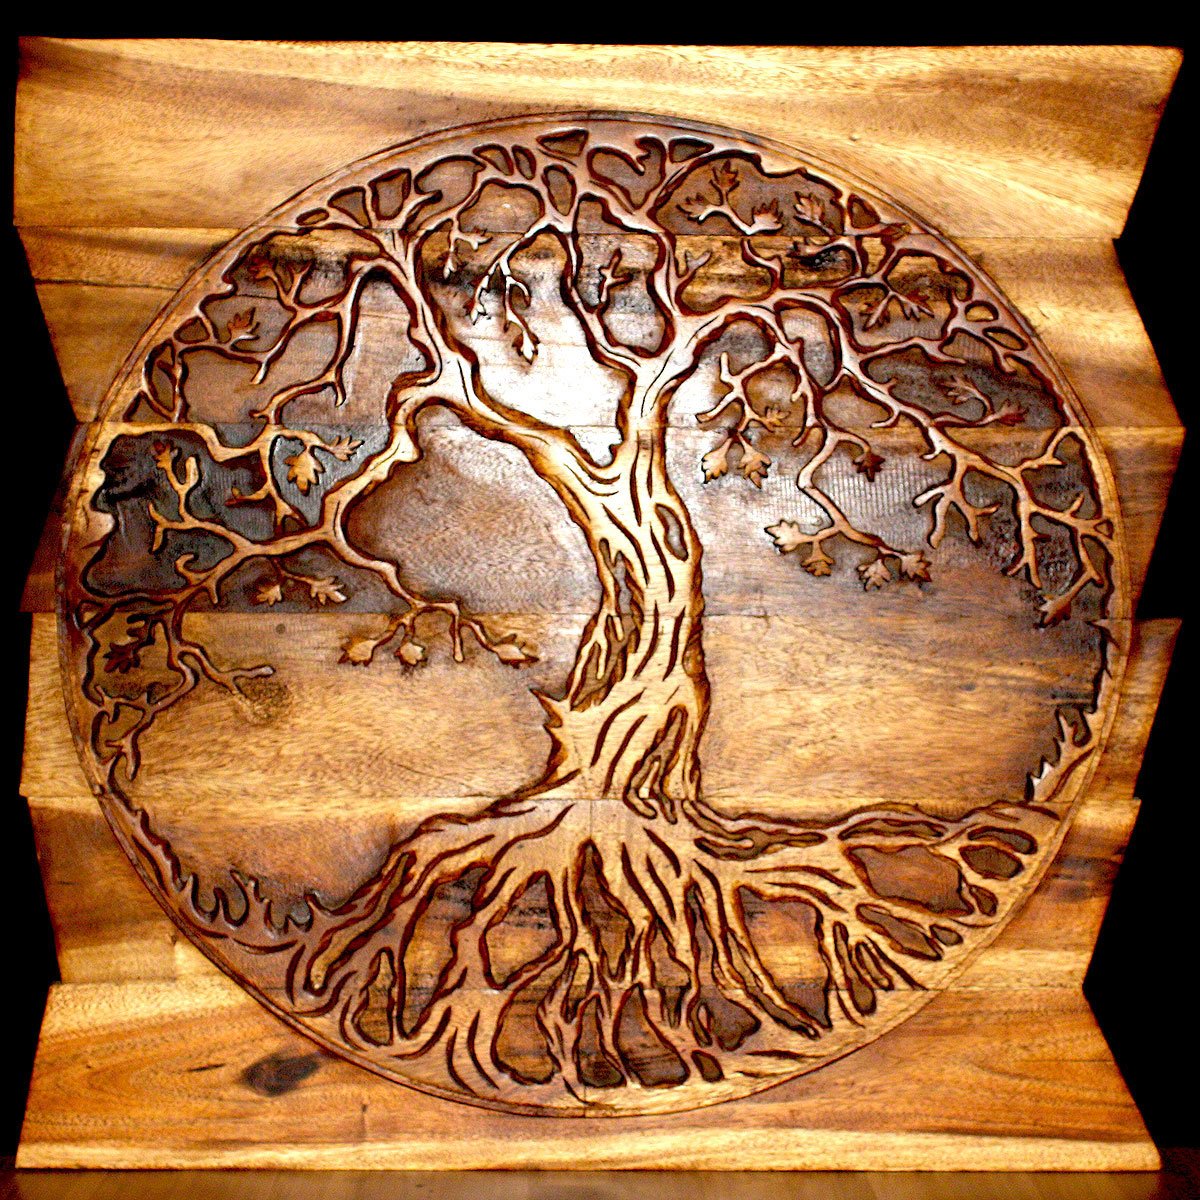 Haussmann® Wood Tree of Life Round on Uneven Boards 36 x 36 in Walnut